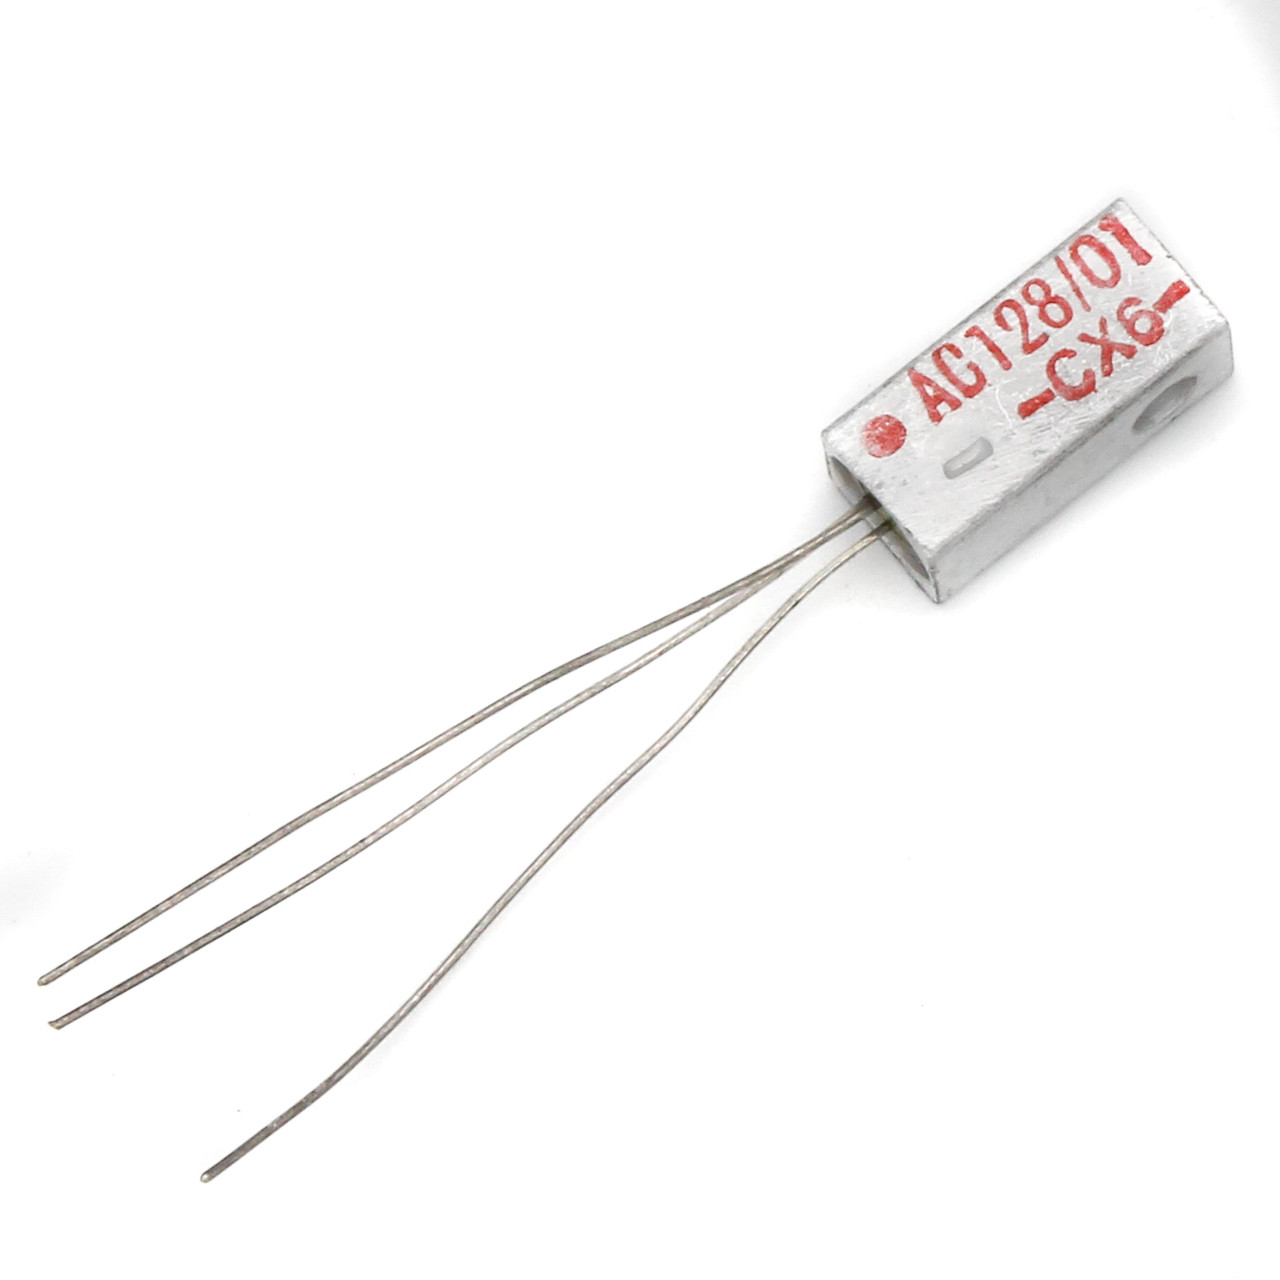 Made in Poland military Germanium PNP transistor 10pcs ASY37S = AC128